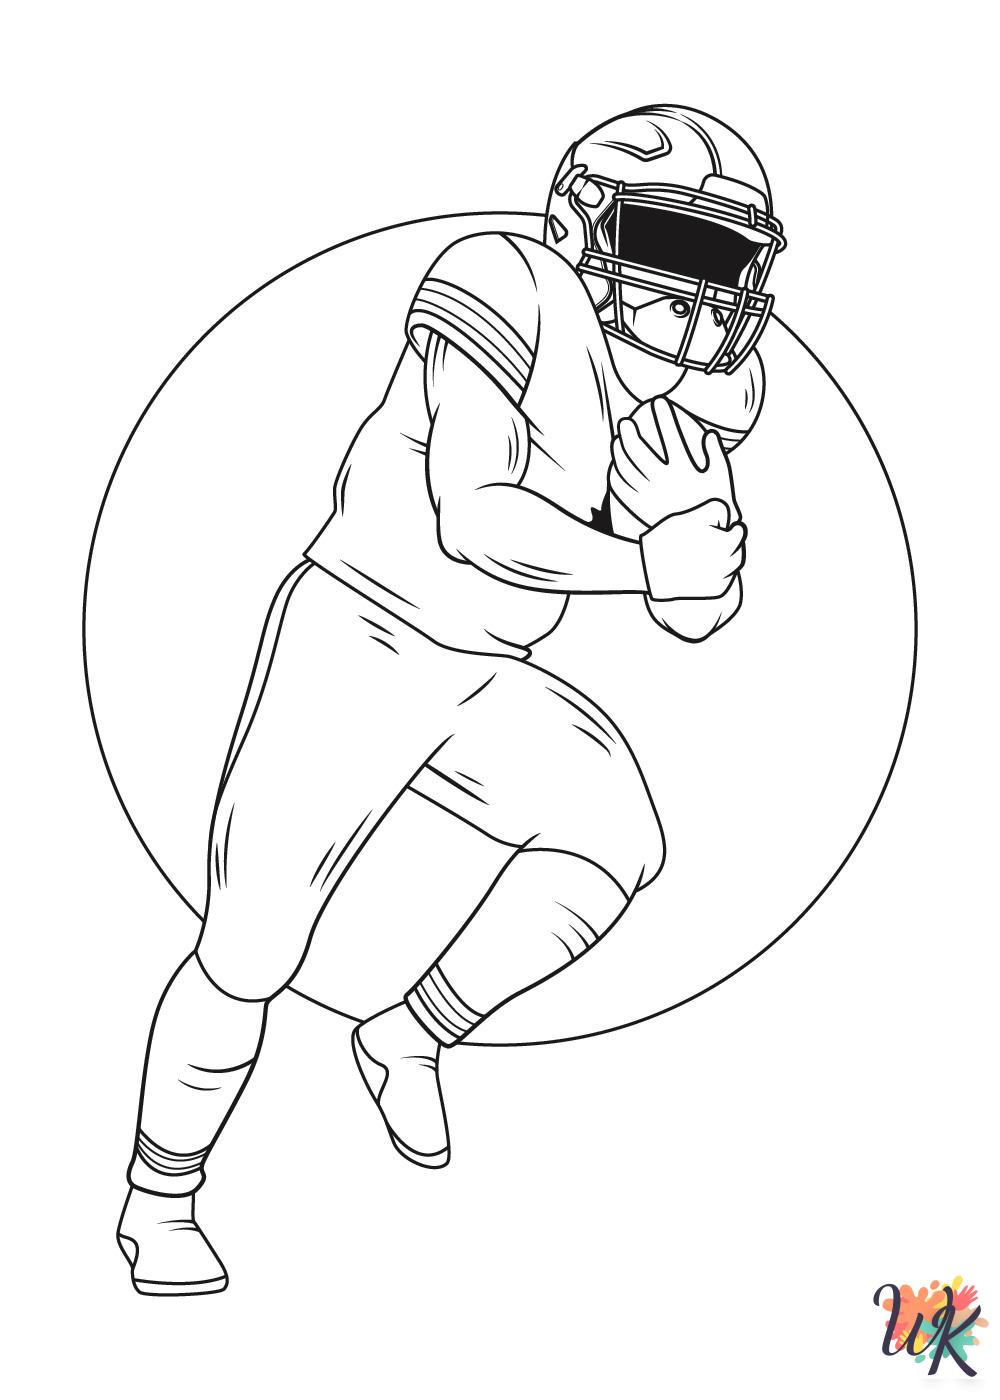 NFL coloring pages free printable